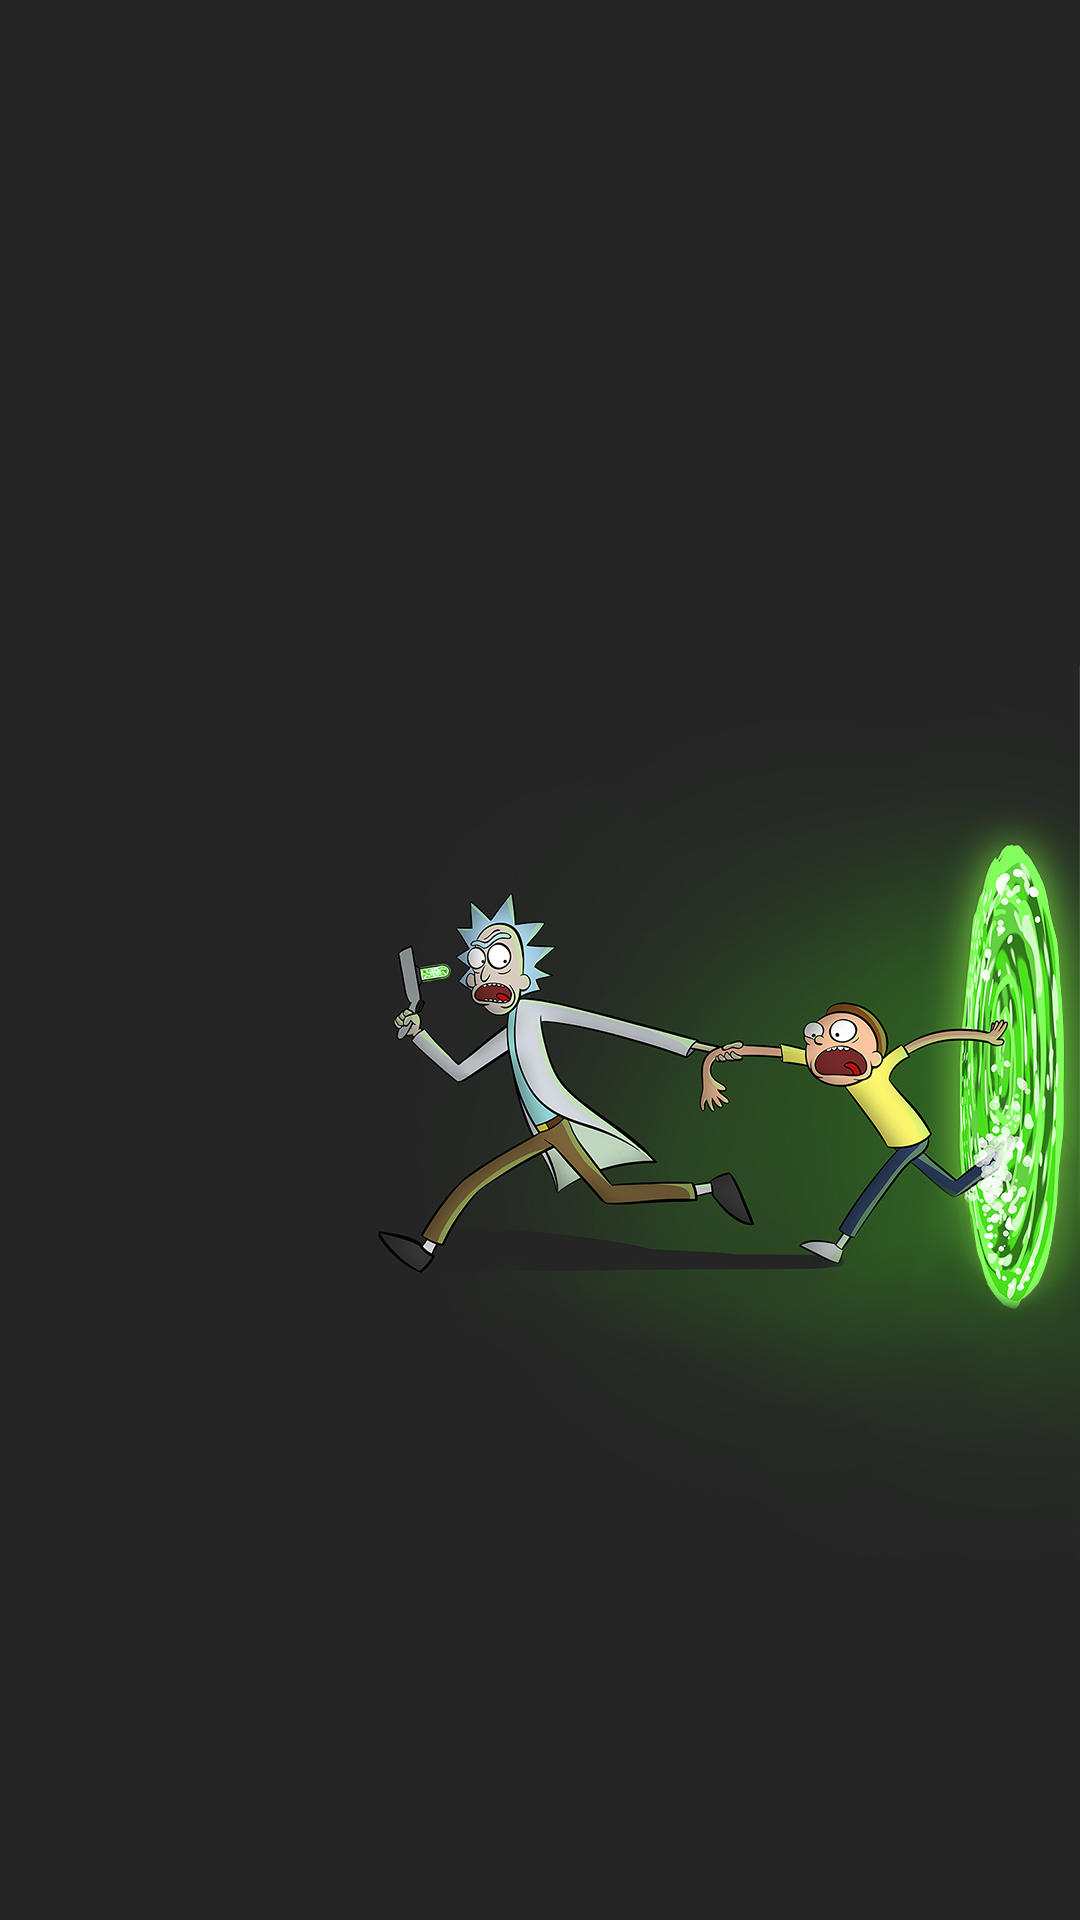 Rick and Morty iPhone Wallpaper resolution 1080x1920